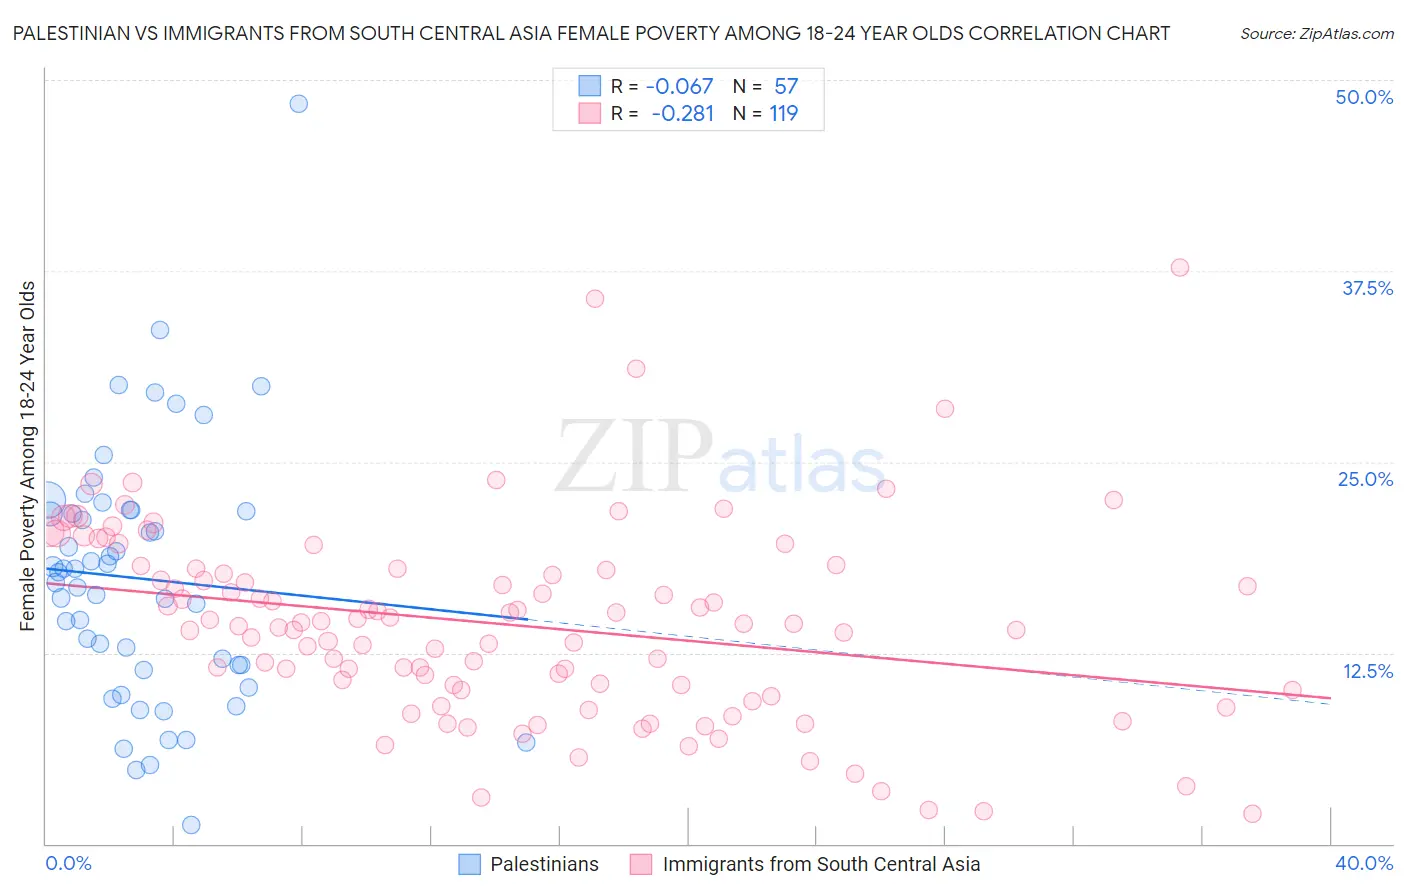 Palestinian vs Immigrants from South Central Asia Female Poverty Among 18-24 Year Olds